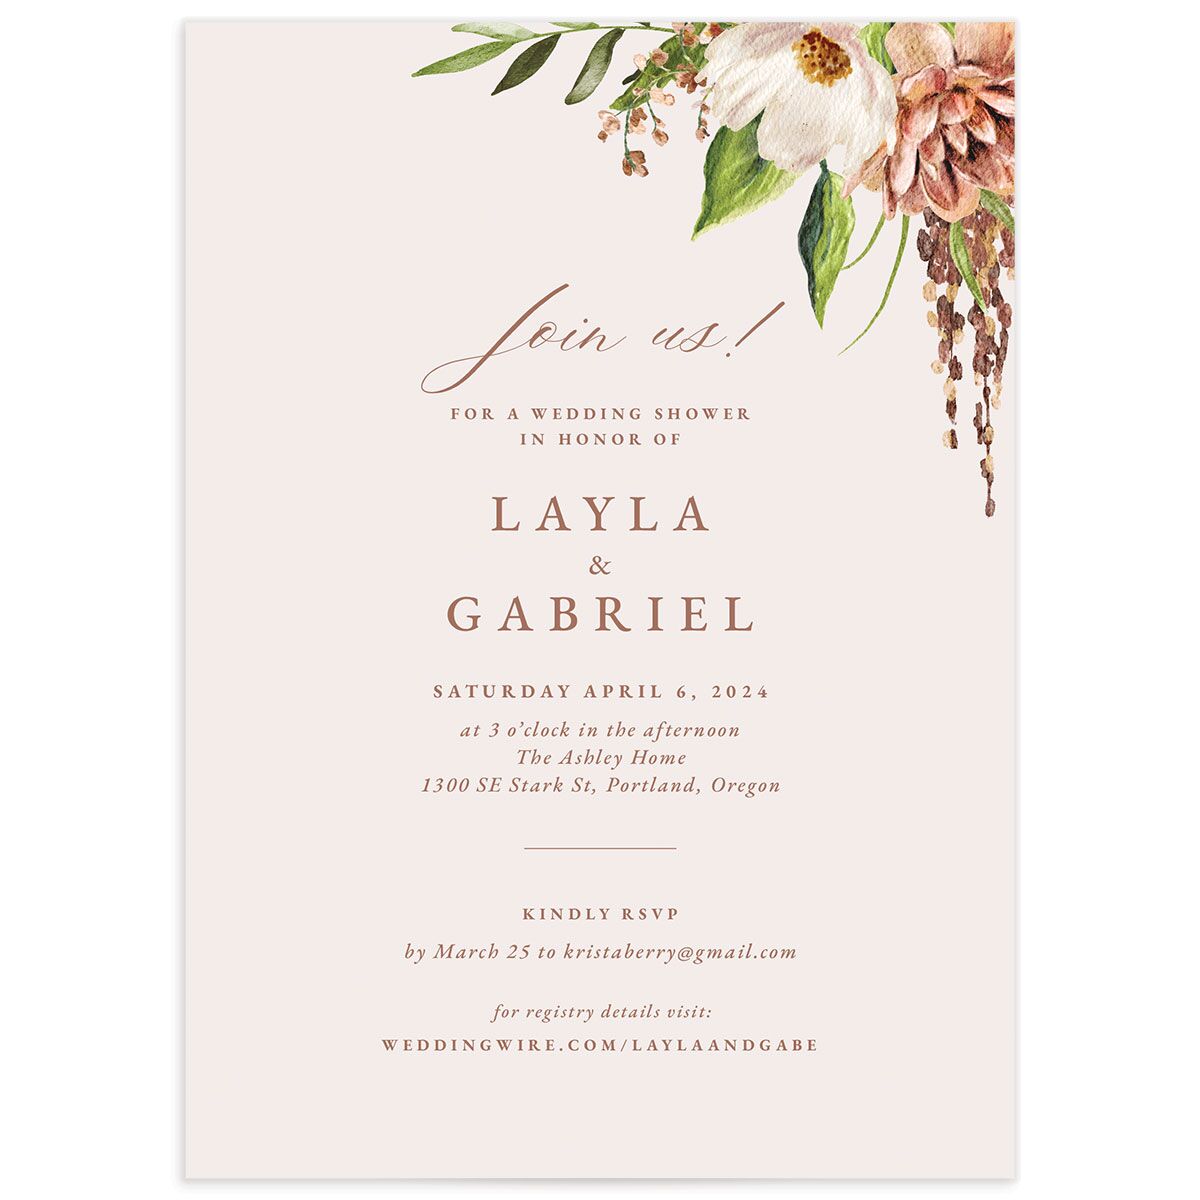 Painted Blossoms Bridal Shower Invitations